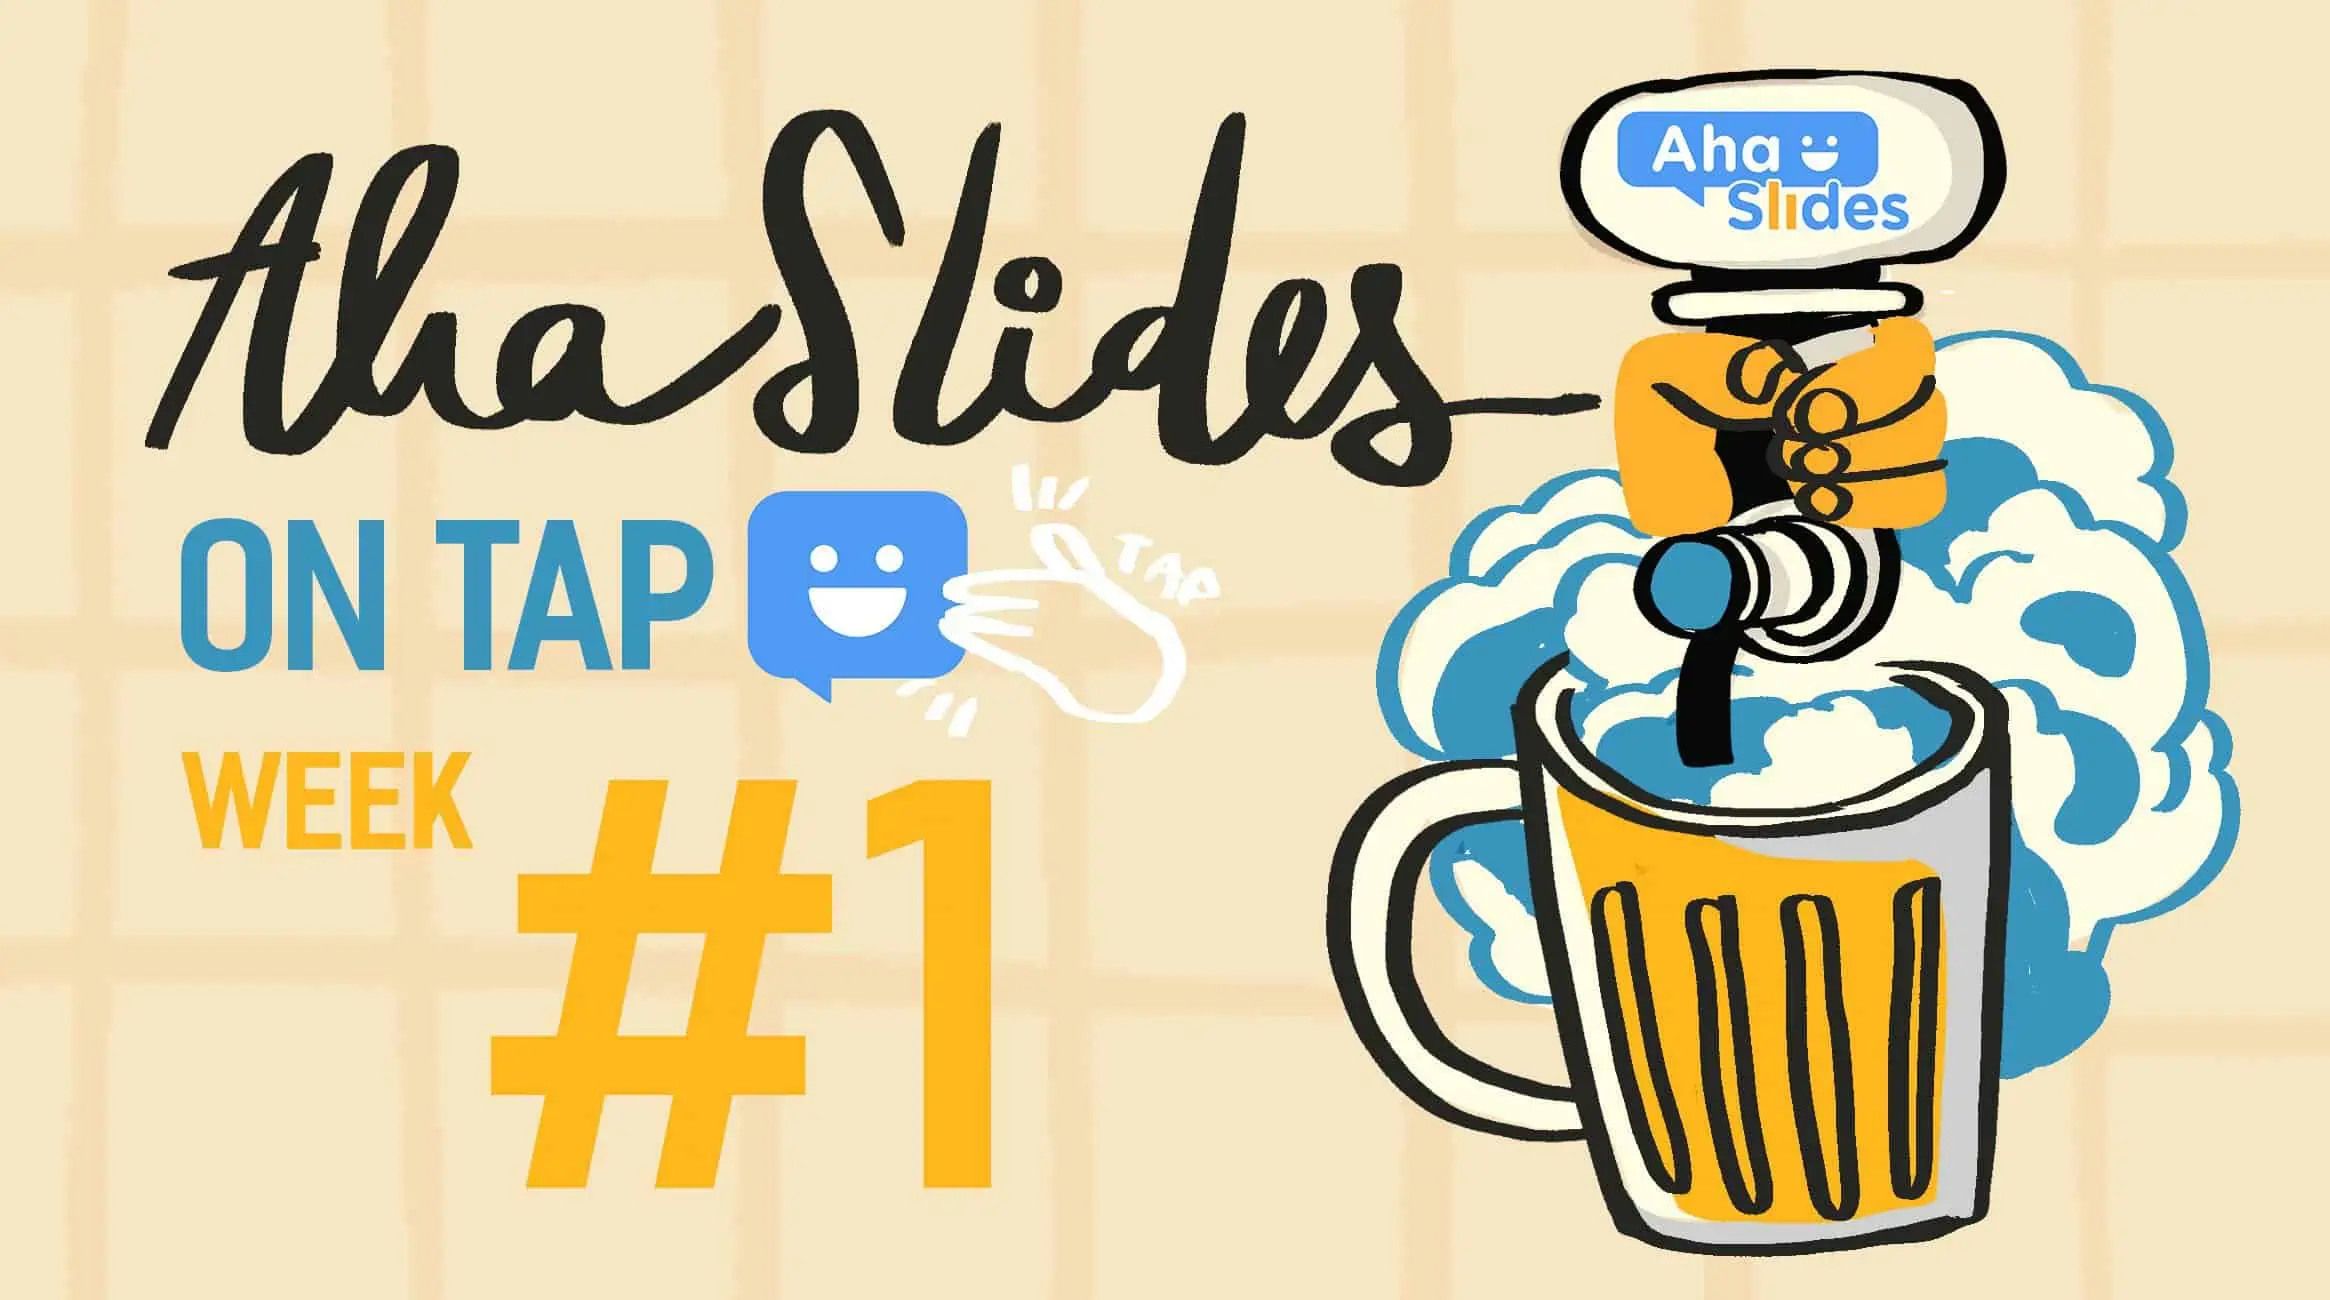 Funny Pub Quiz Questions and Answers: AhaSlides on Tap #1 (Free Download!)